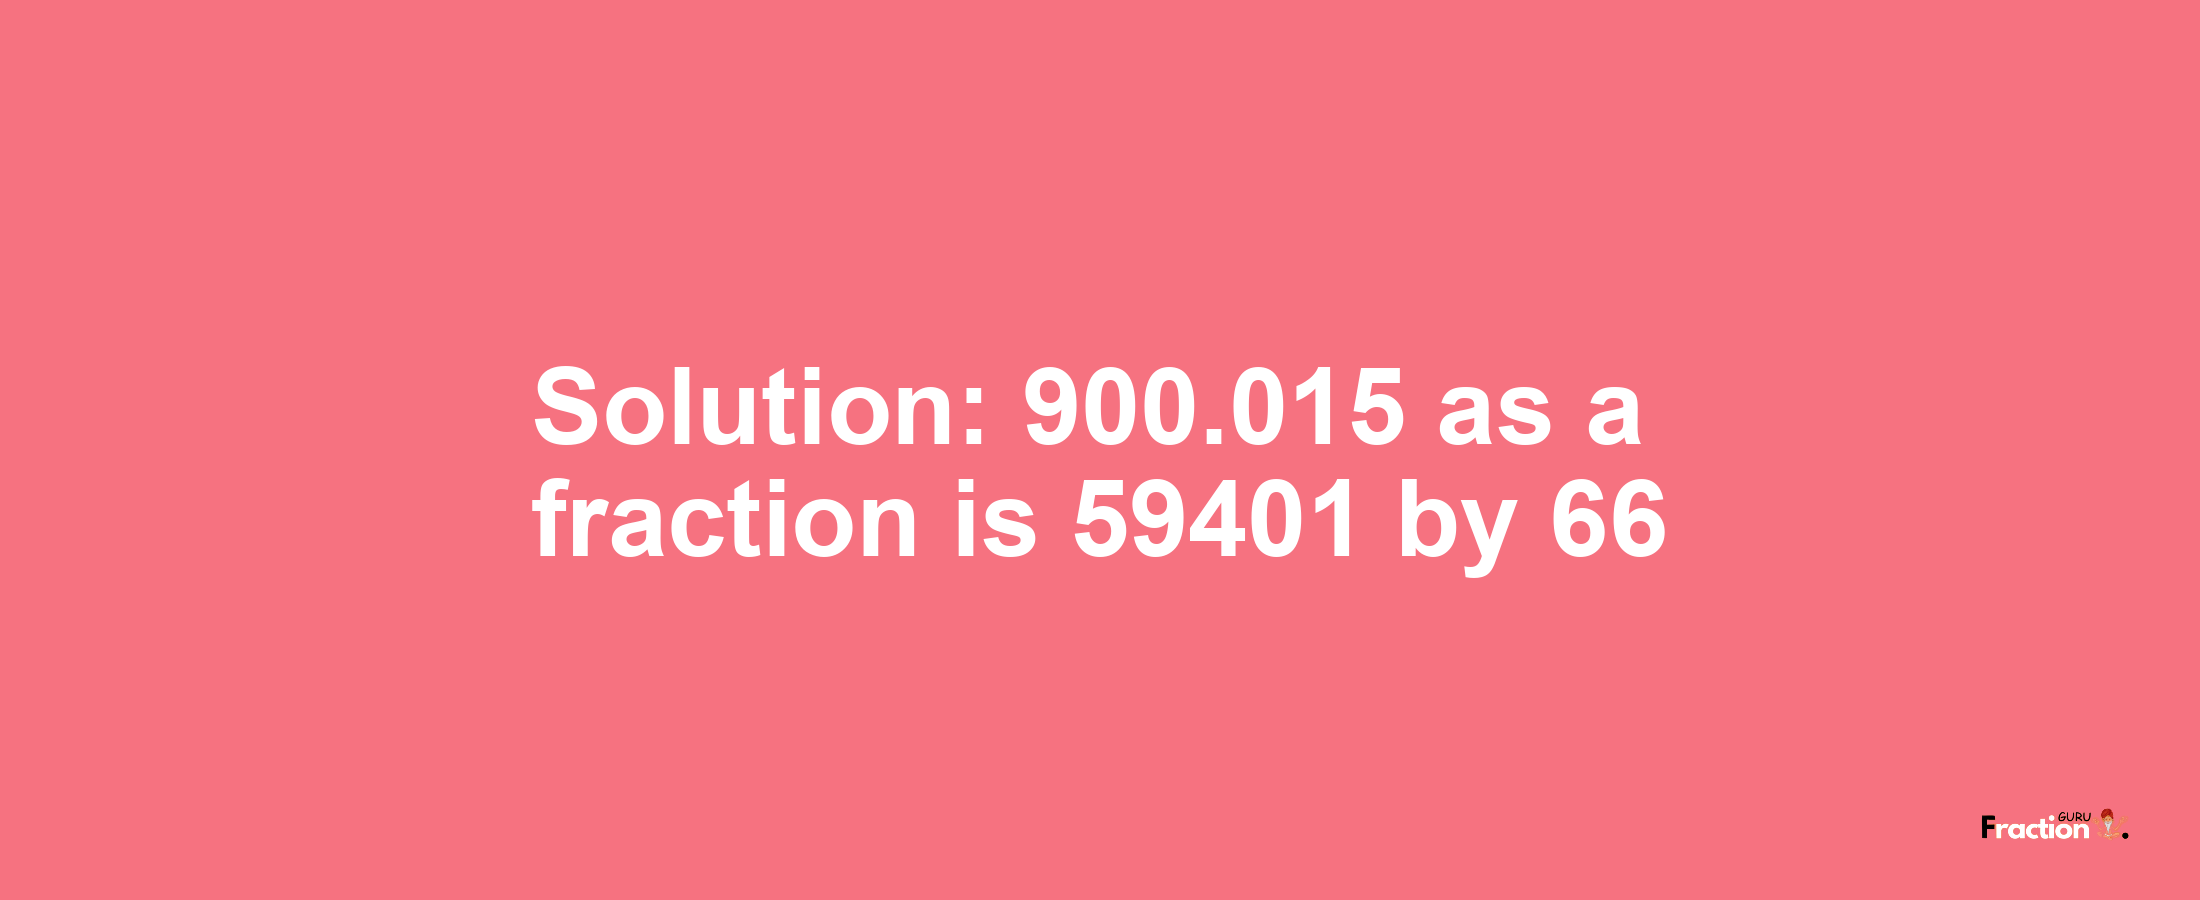 Solution:900.015 as a fraction is 59401/66